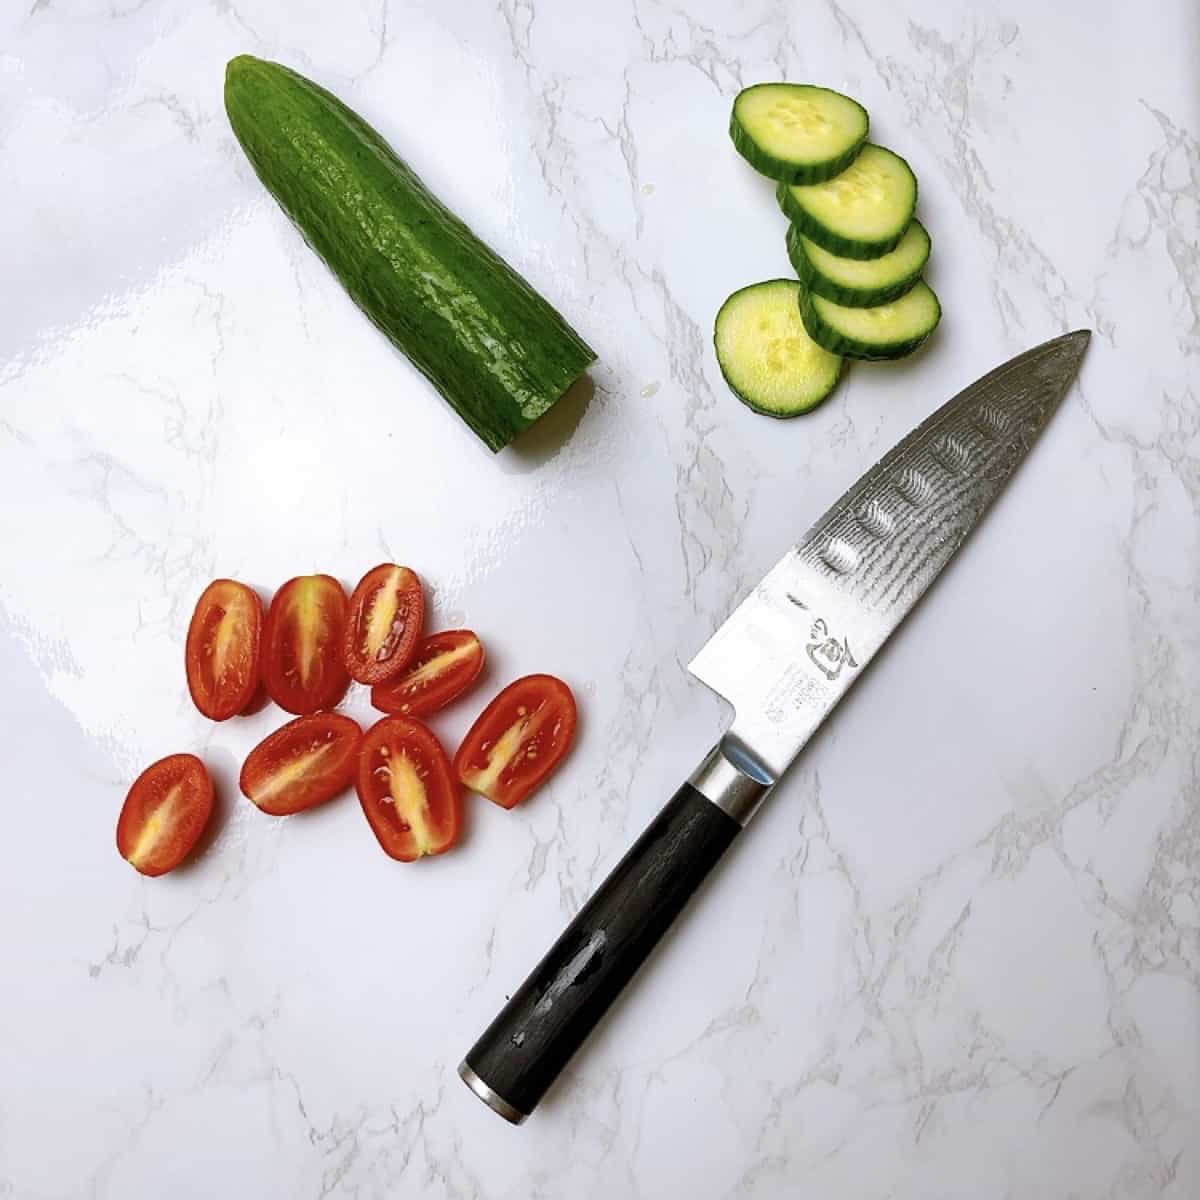 Salad ingredients chopped tomato and cucumber with knife showing